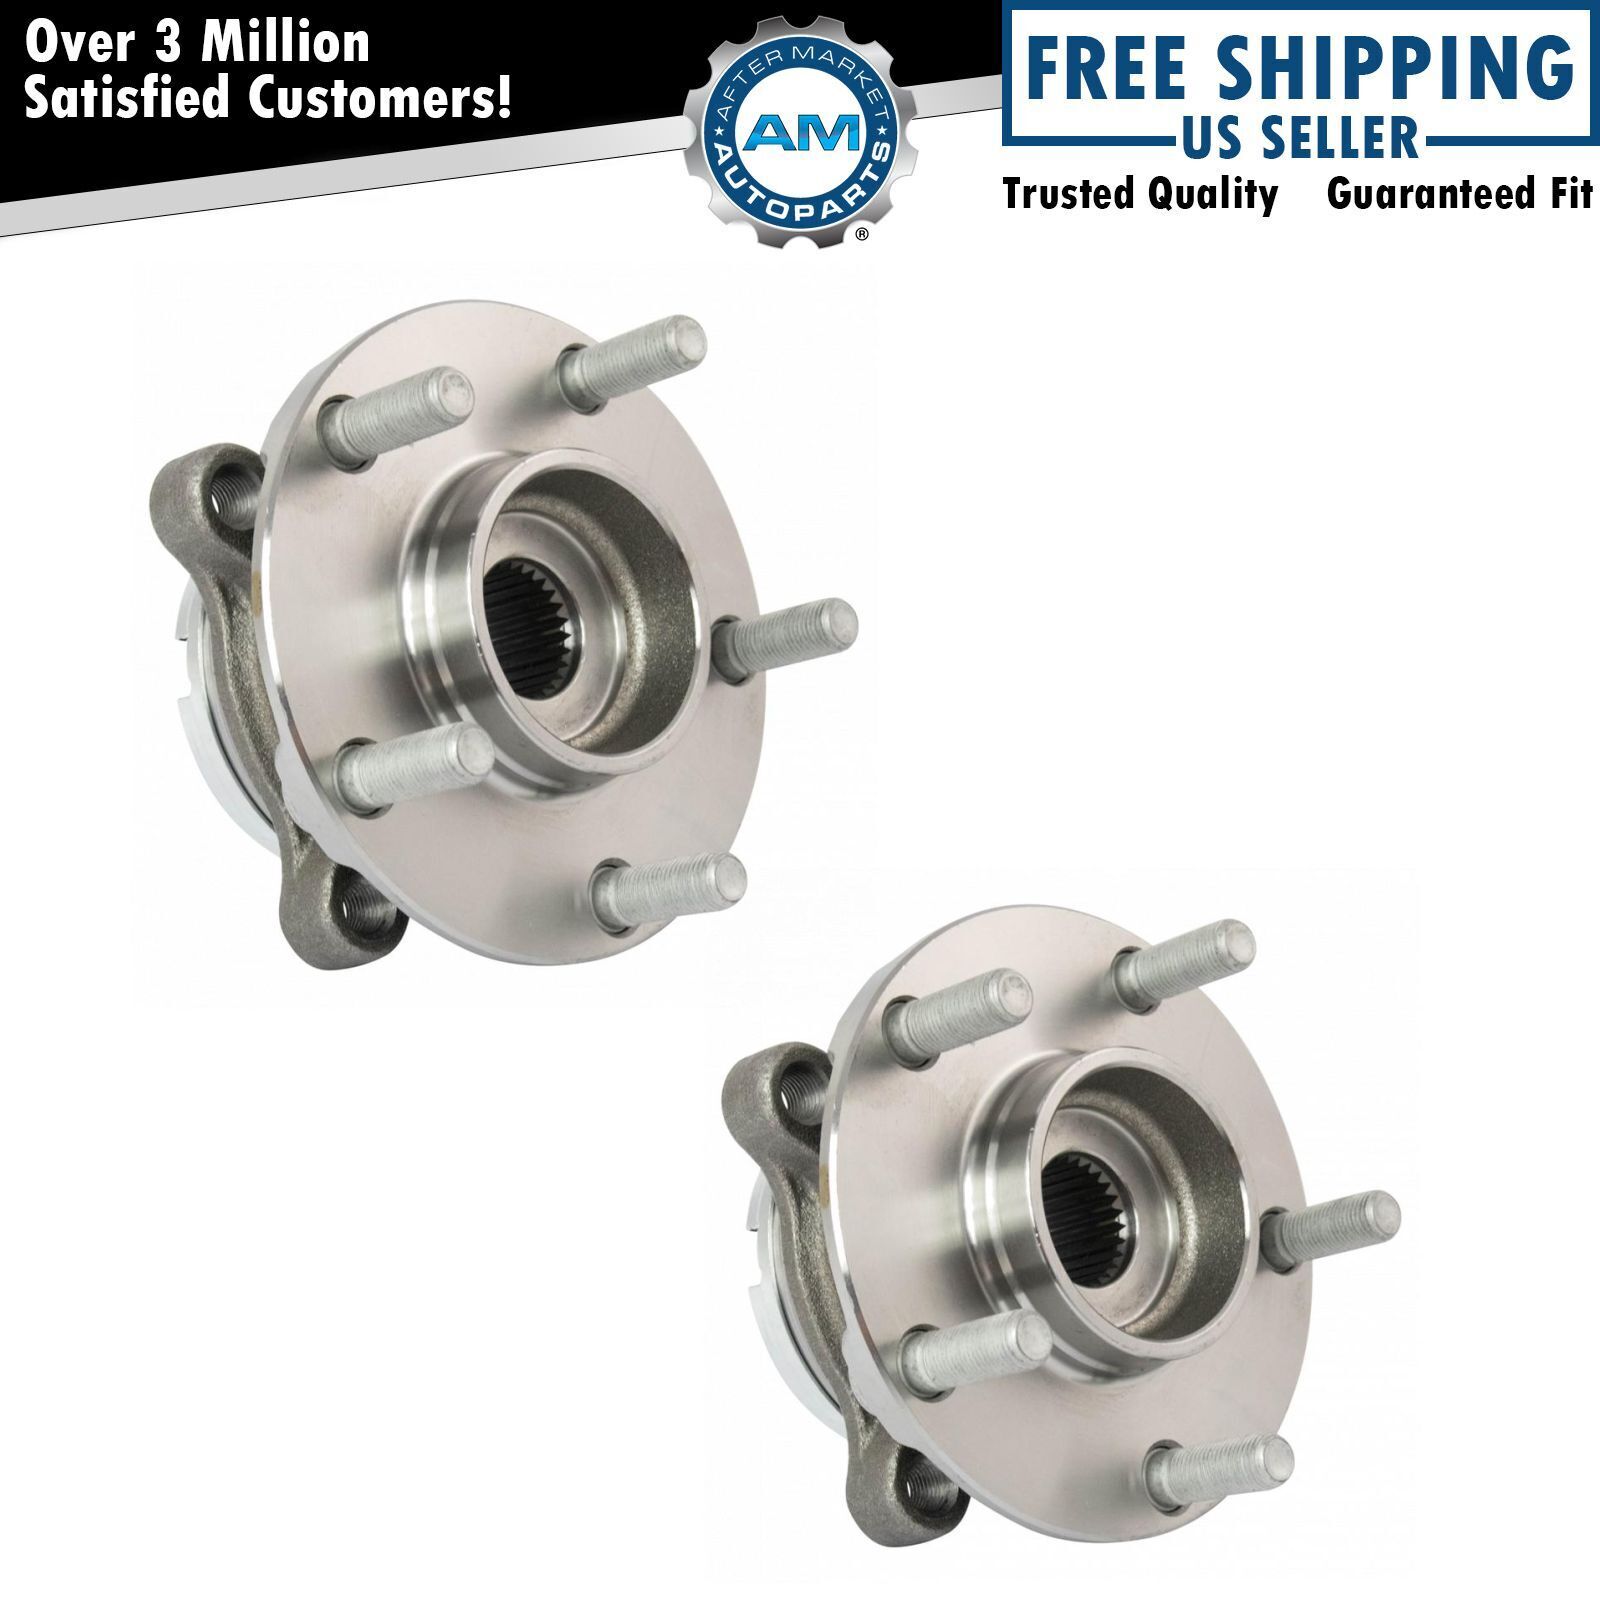 Front Wheel Bearing & Hub Assembly Pair Set LH & RH Sides for Nissan GT-R New